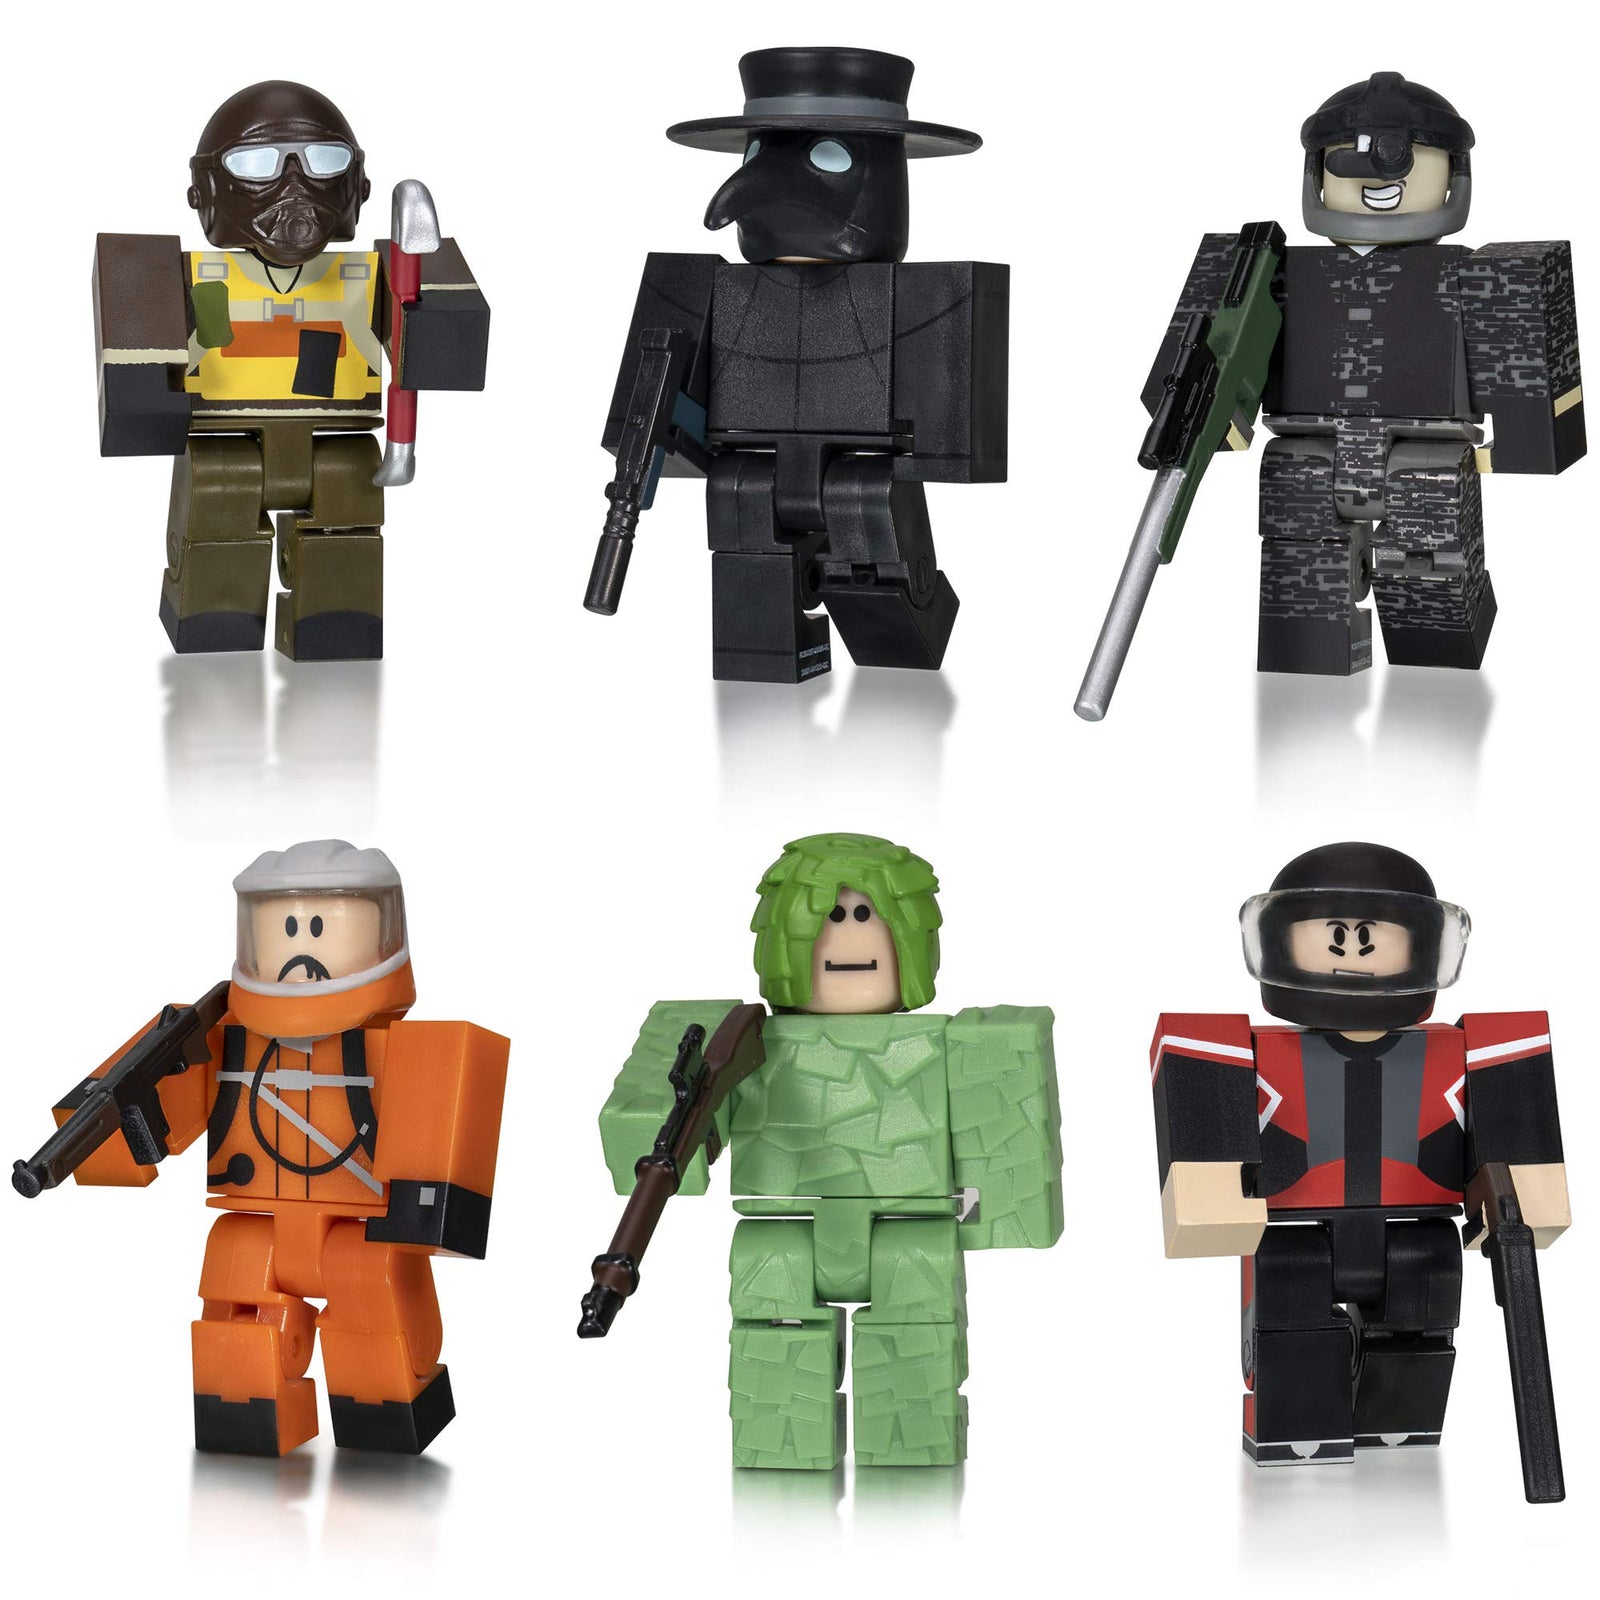 Roblox Action Collection - Apocalypse Rising 2 Six Figure Pack [Includes Exclusive Virtual Item]